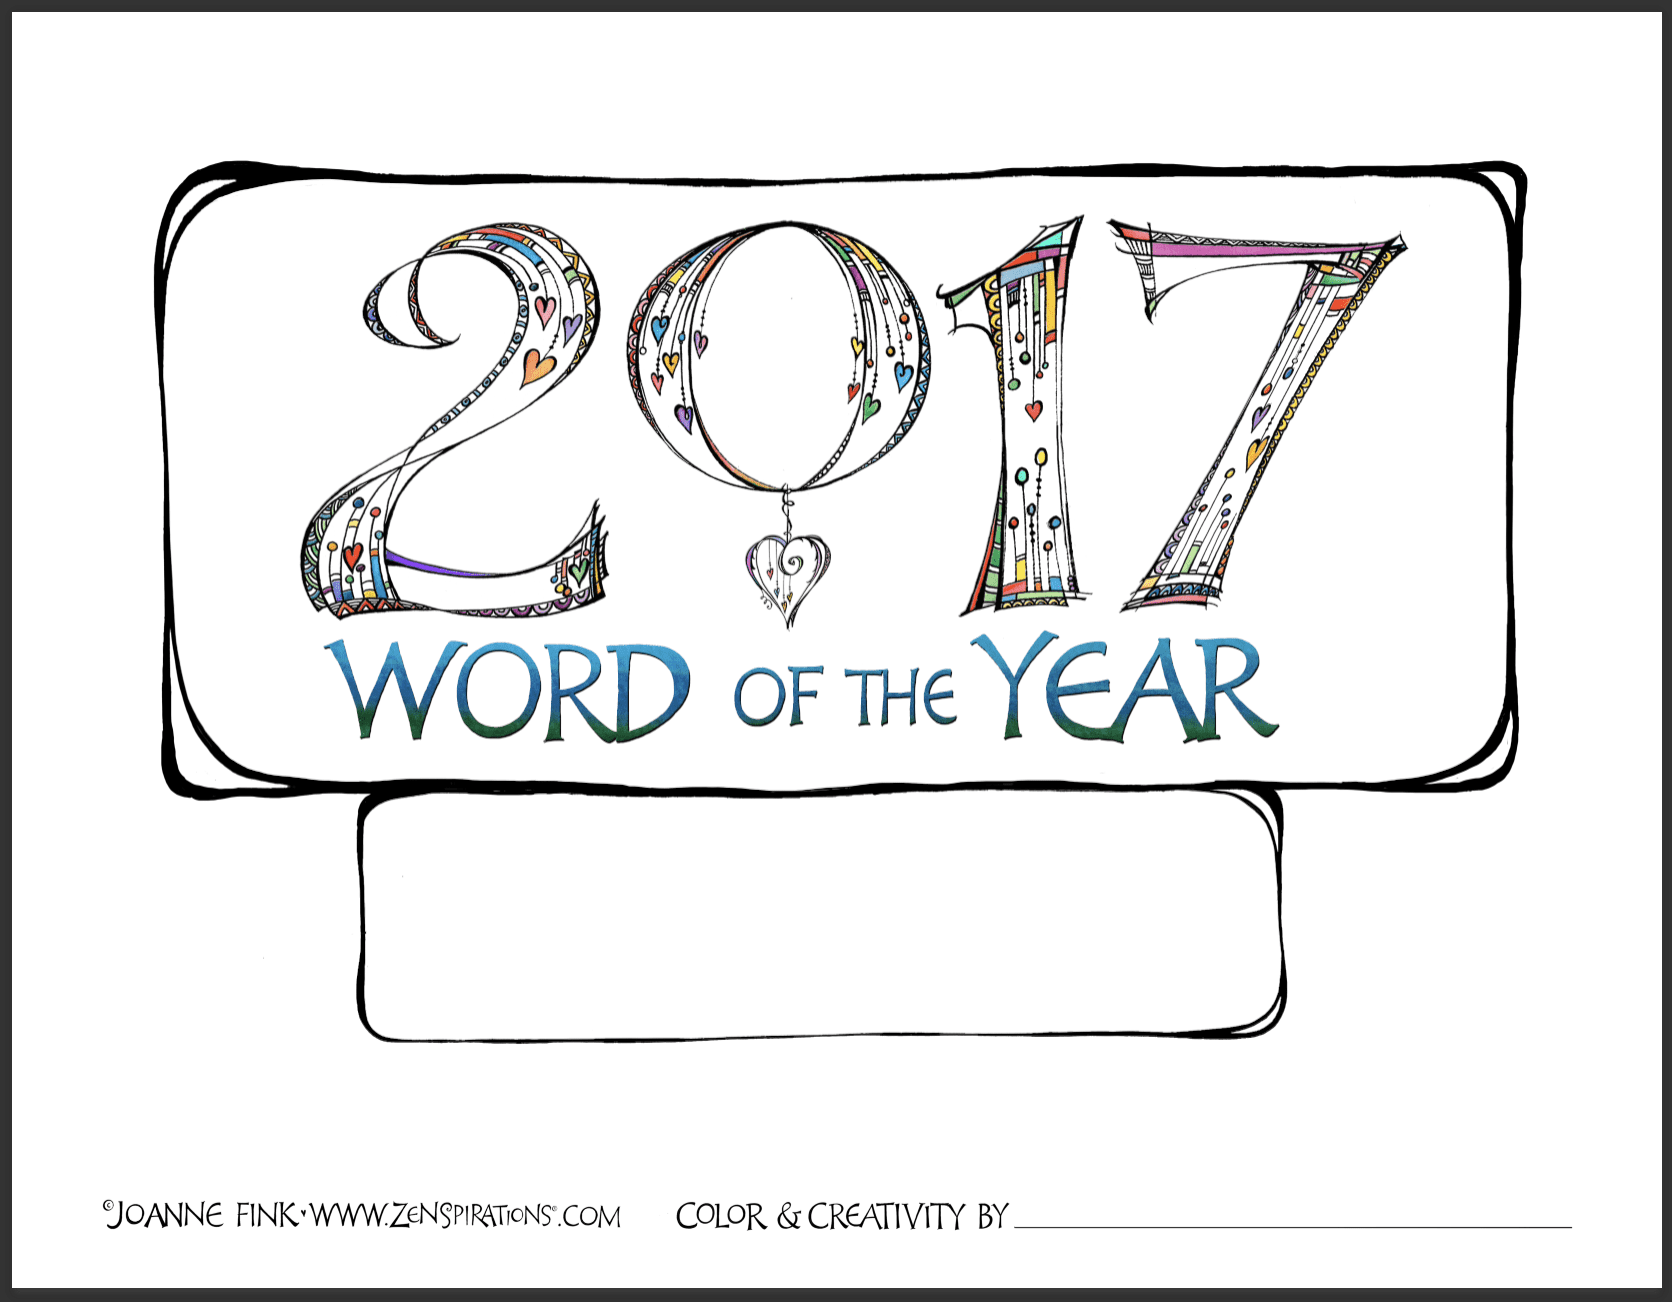 zenspirations_by_joanne_fink_blog_2017_word_of_the_year